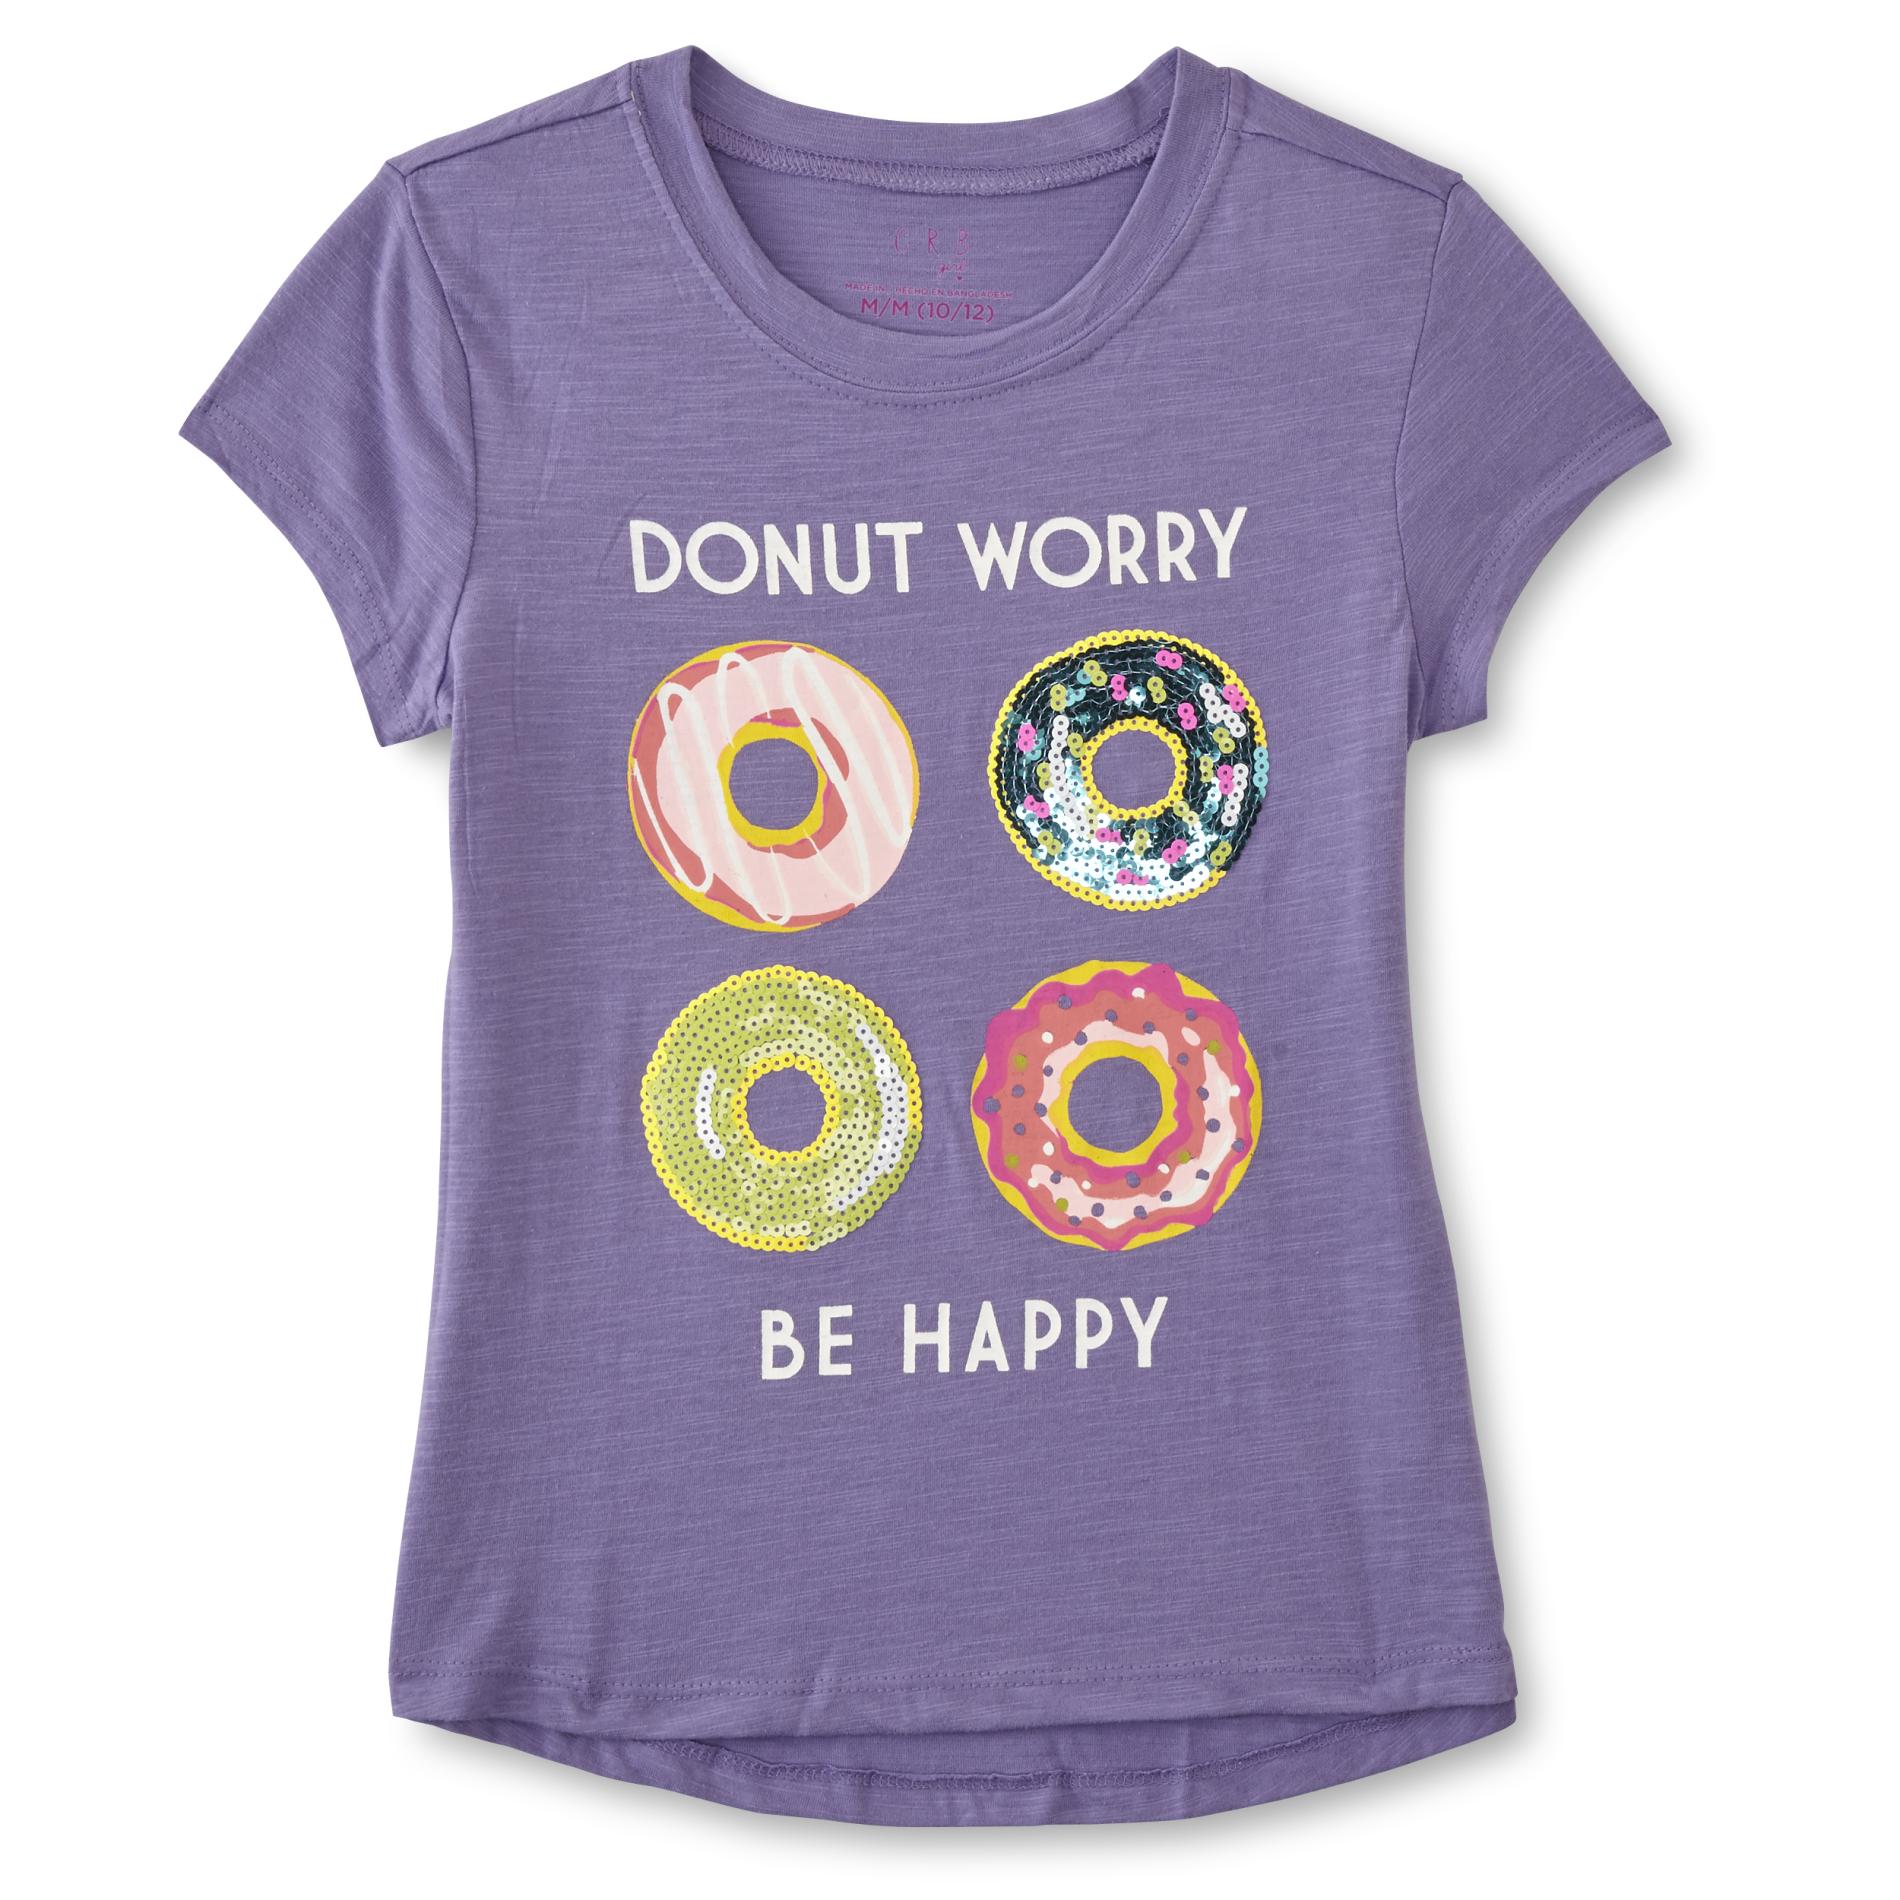 Canyon River Blues Girls' Embellished Graphic T-Shirt - Donut Worry Be Happy